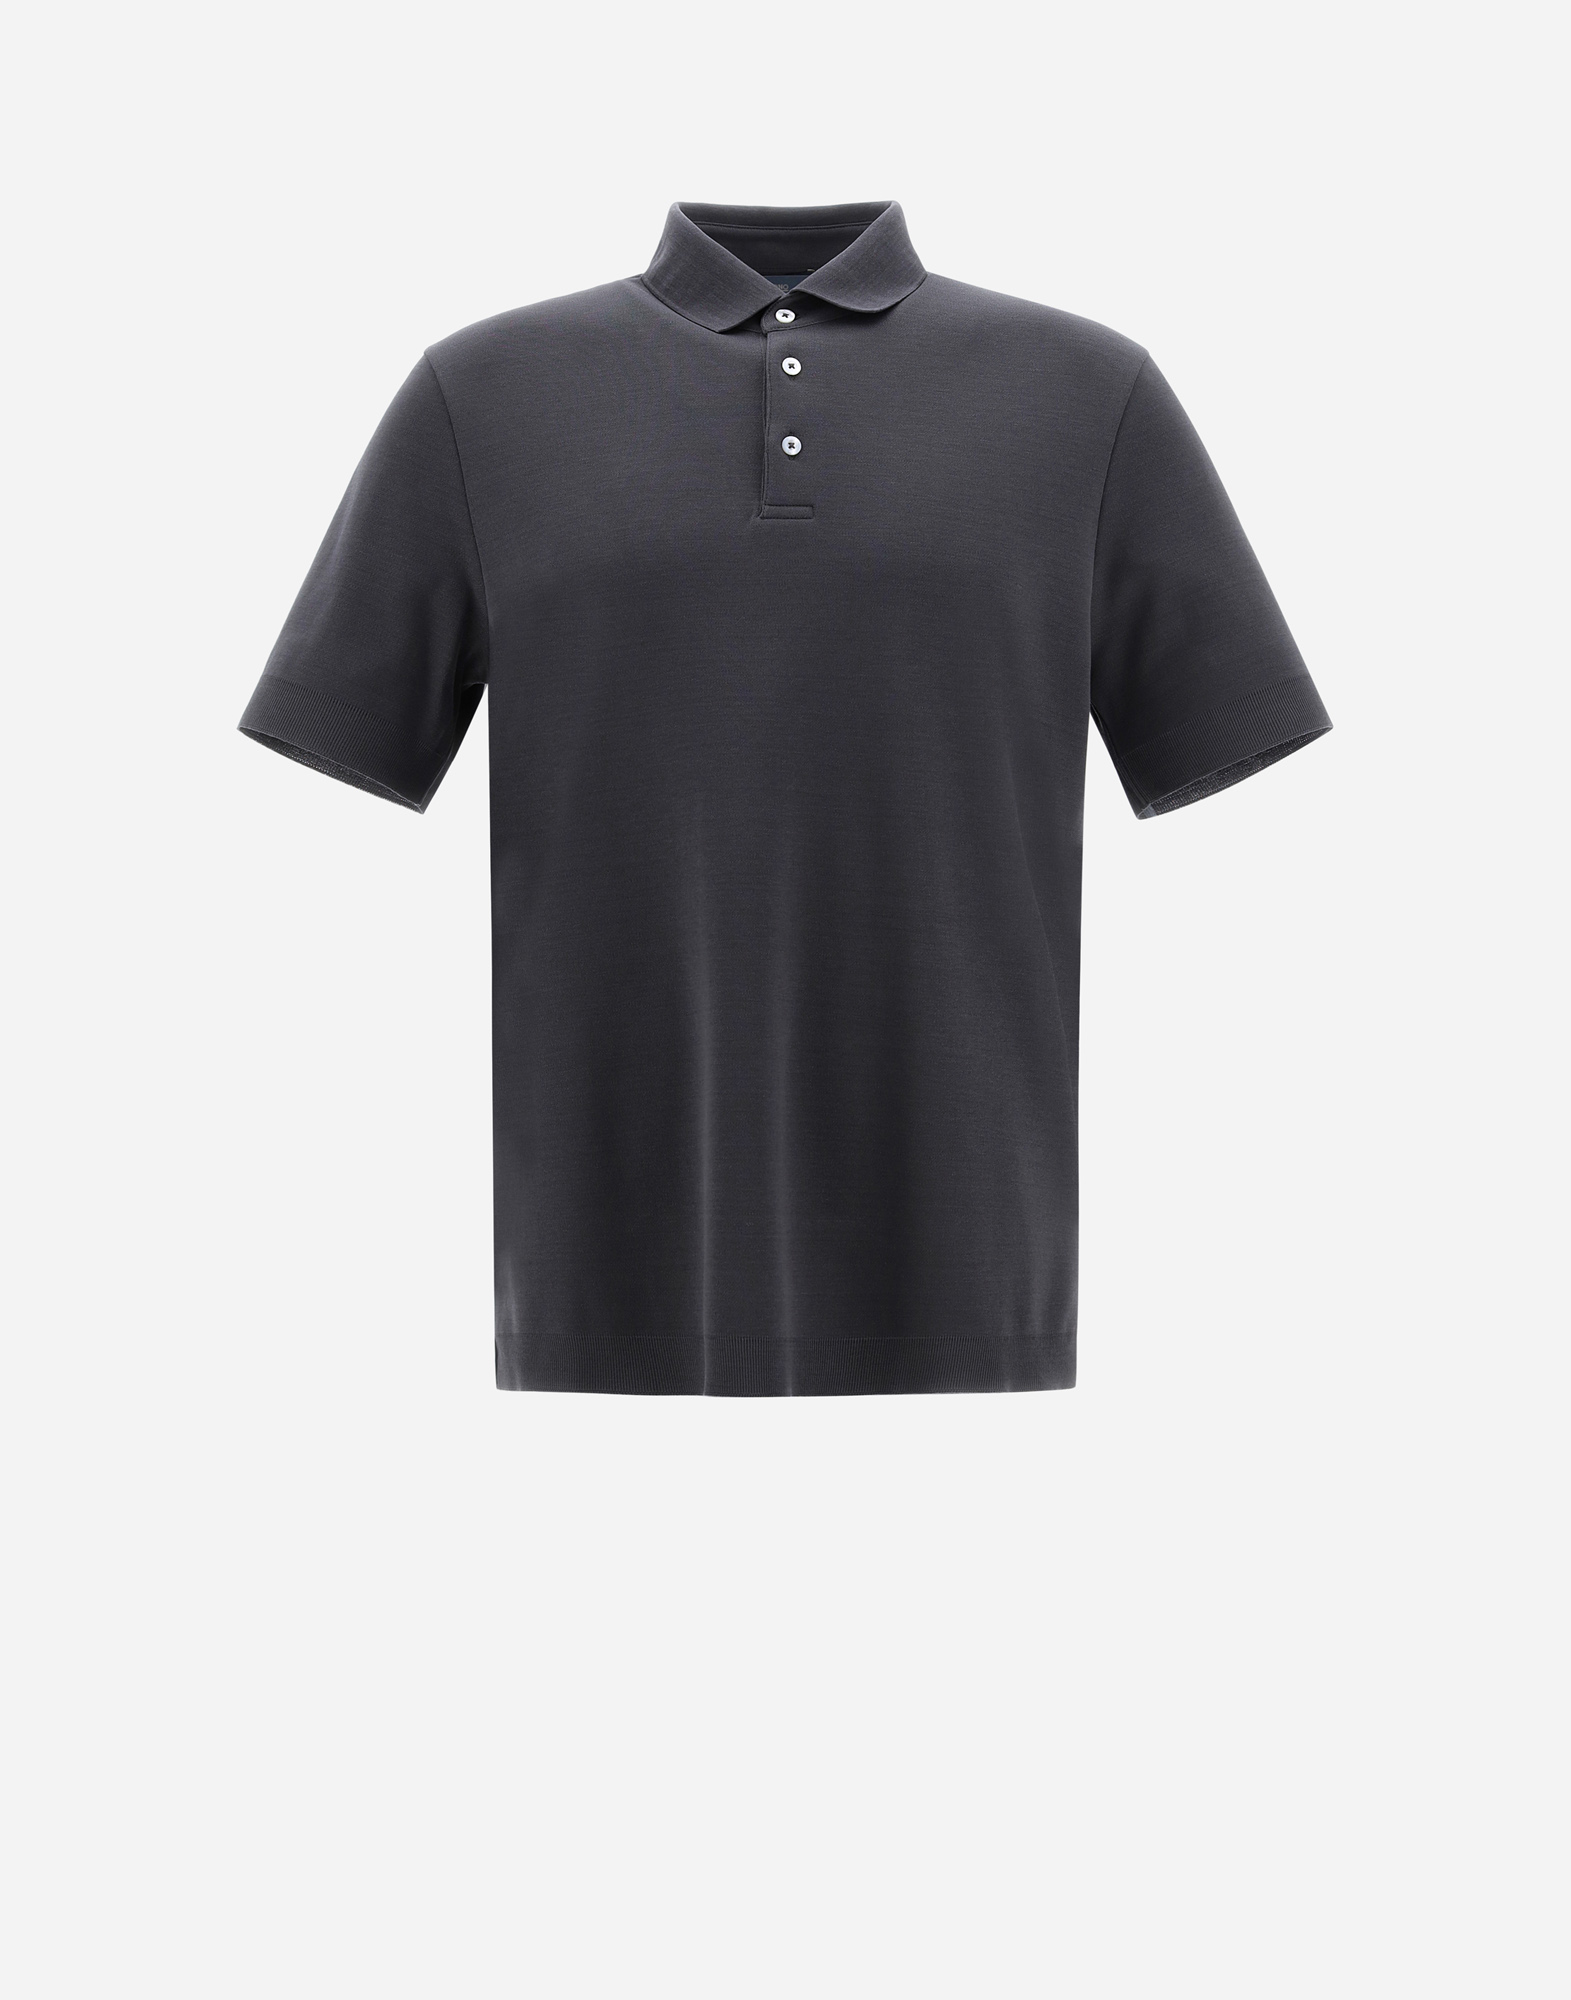 Herno Jersey Knit Effect Polo Shirt In Grey